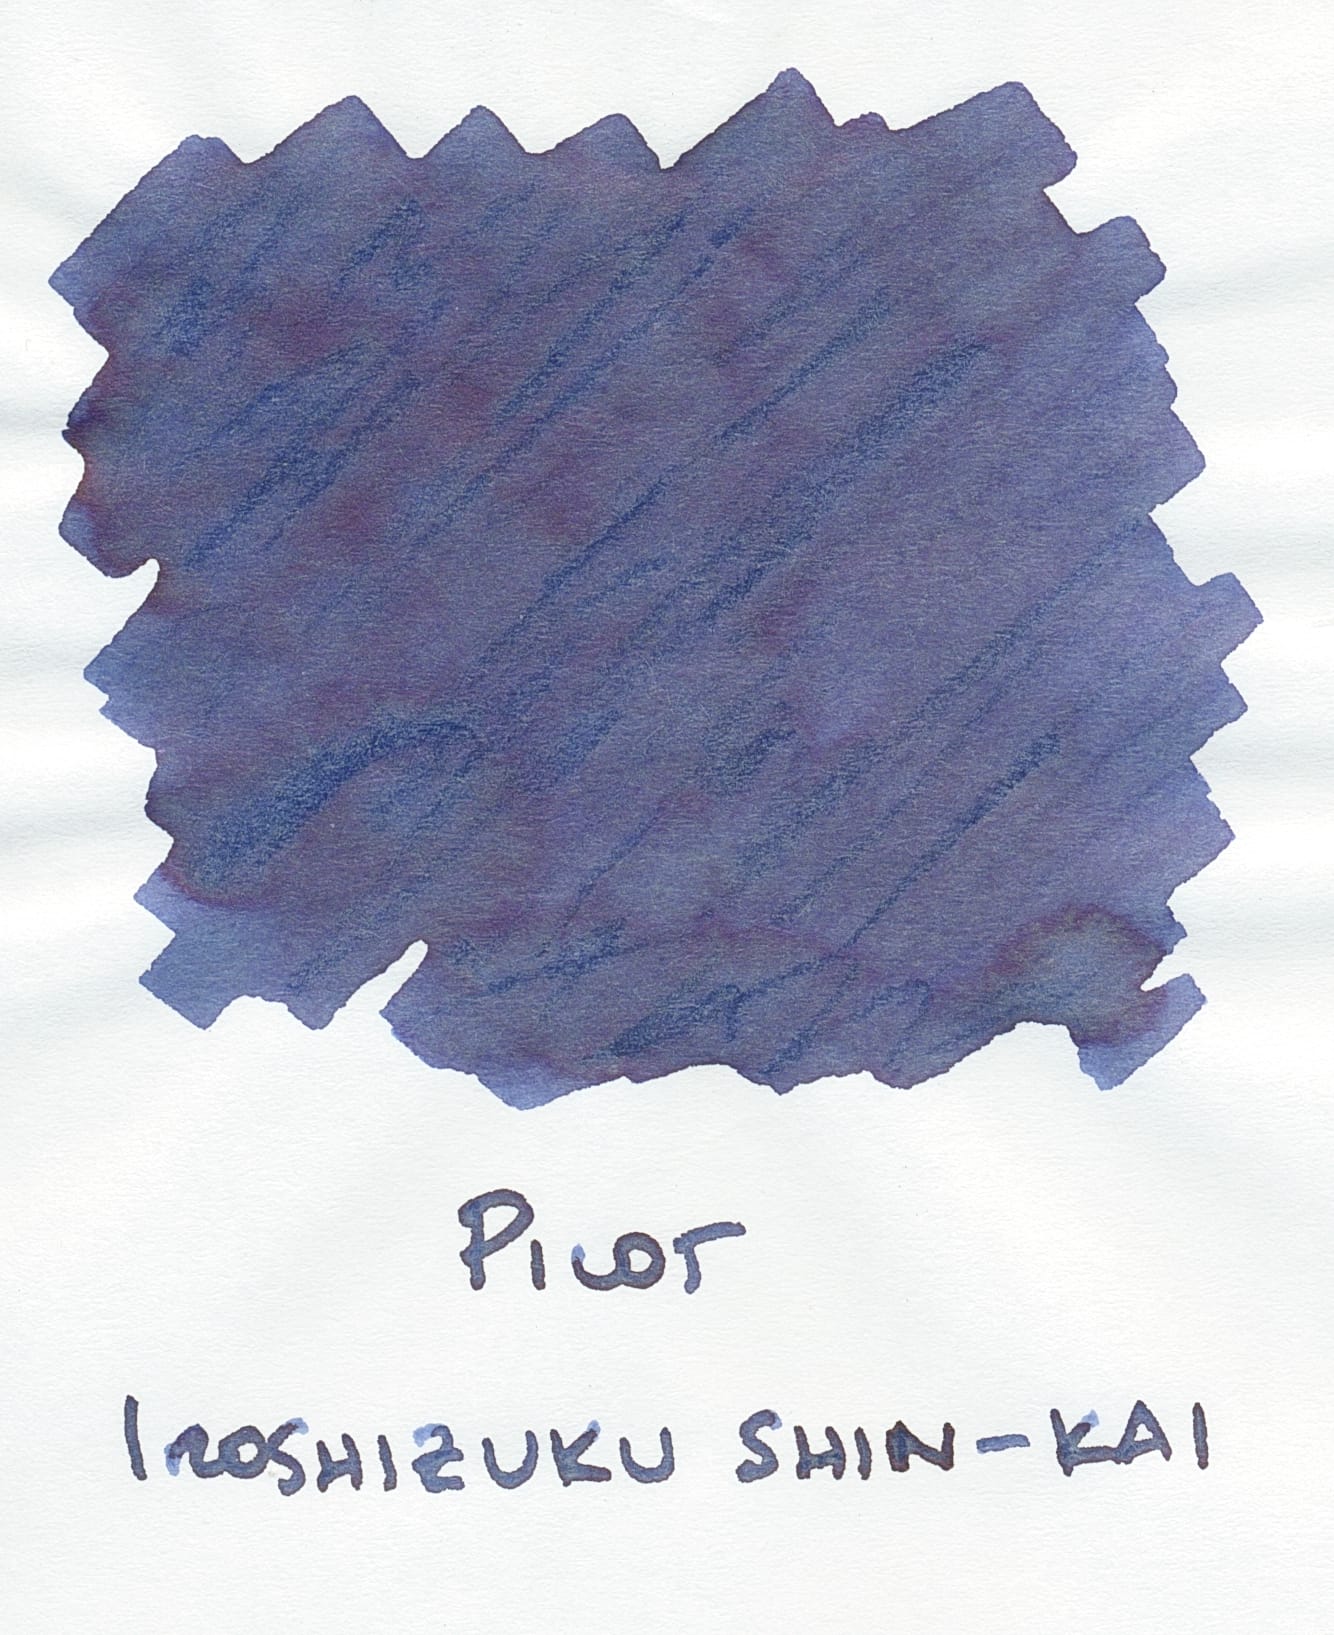 Scan of an ink swatch on paper for a blue-black ink that shows a little bit of red sheen where the ink pooled heavily, Pilot Iroshizuku Shin-Kai